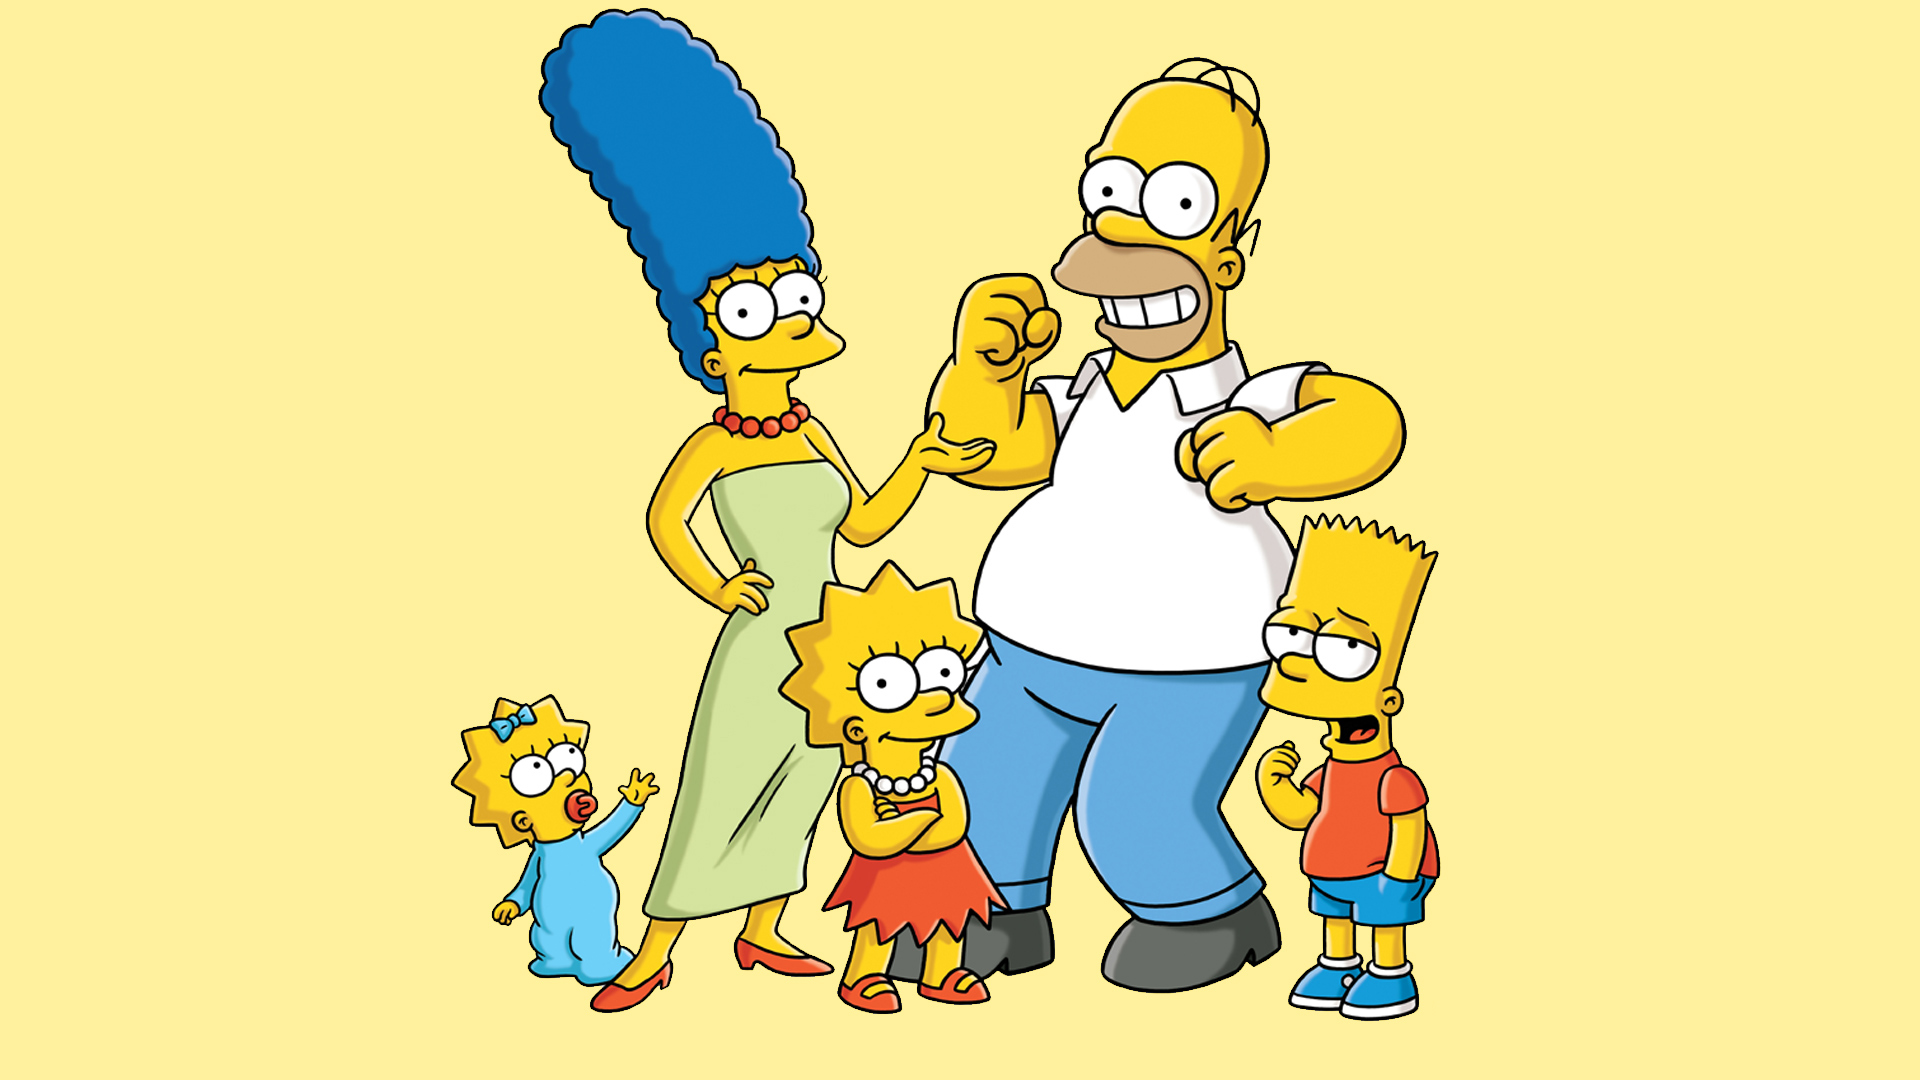 tv show, the simpsons, bart simpson, homer simpson, lisa simpson, maggie simpson, marge simpson